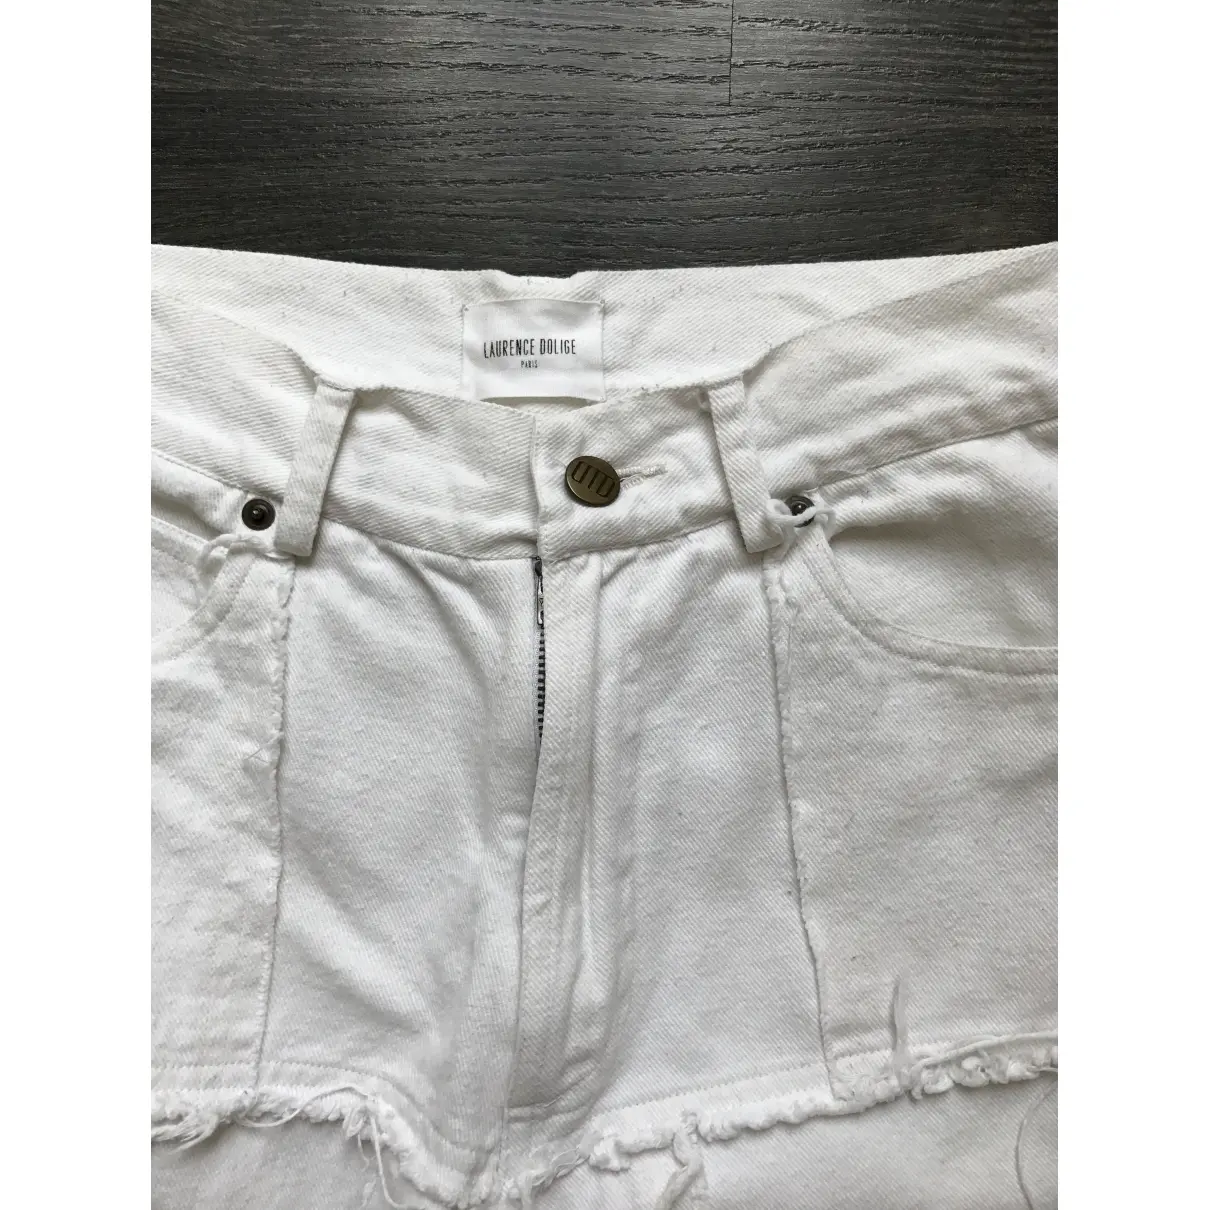 Buy Laurence Dolige White Cotton Jeans online